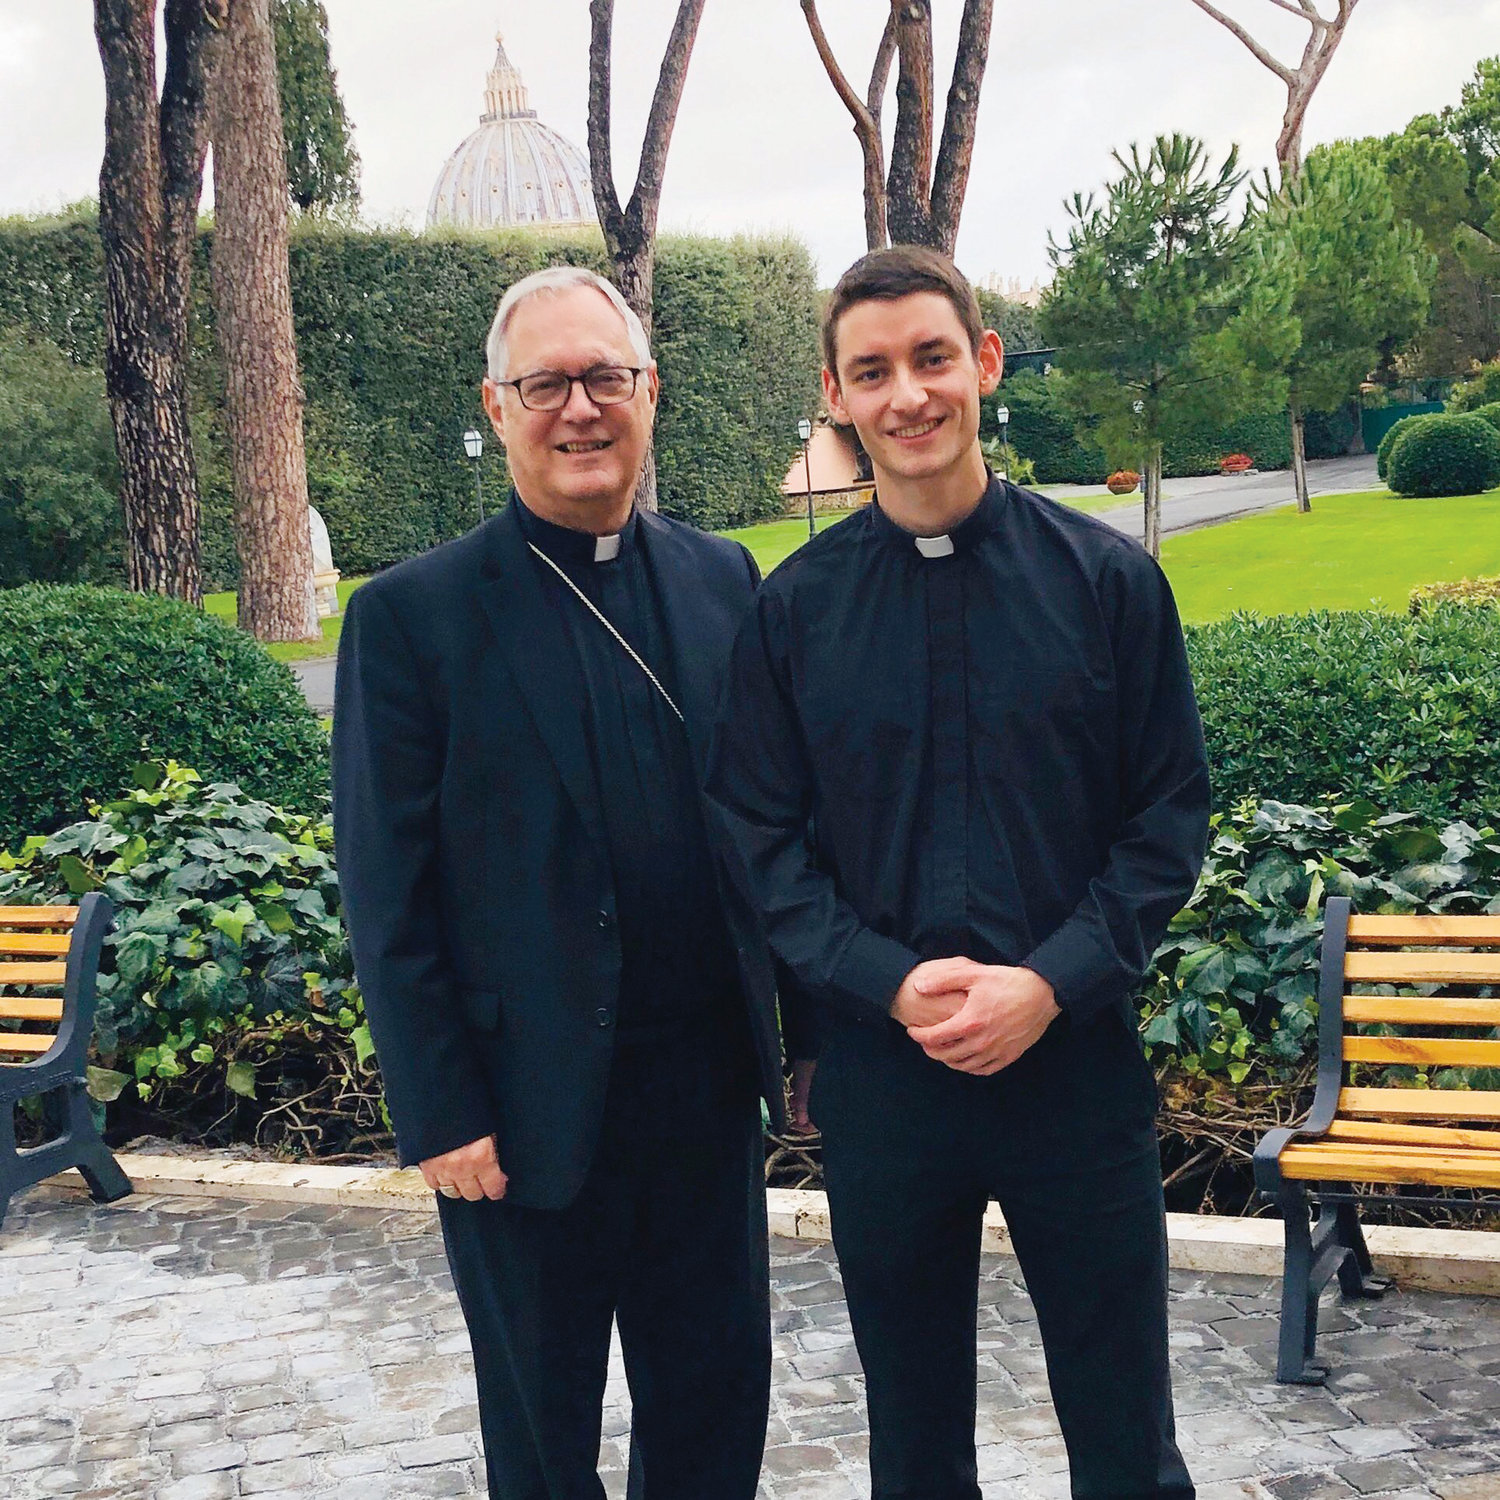 Bishop Tobin visited the Pontifical North American College on Nov. 8 and met with seminarian Patrick Ryan of the Diocese of Providence. He prayed for all of the seminarians and future prospects that they will be courageous and generous in responding to God’s call in their lives.